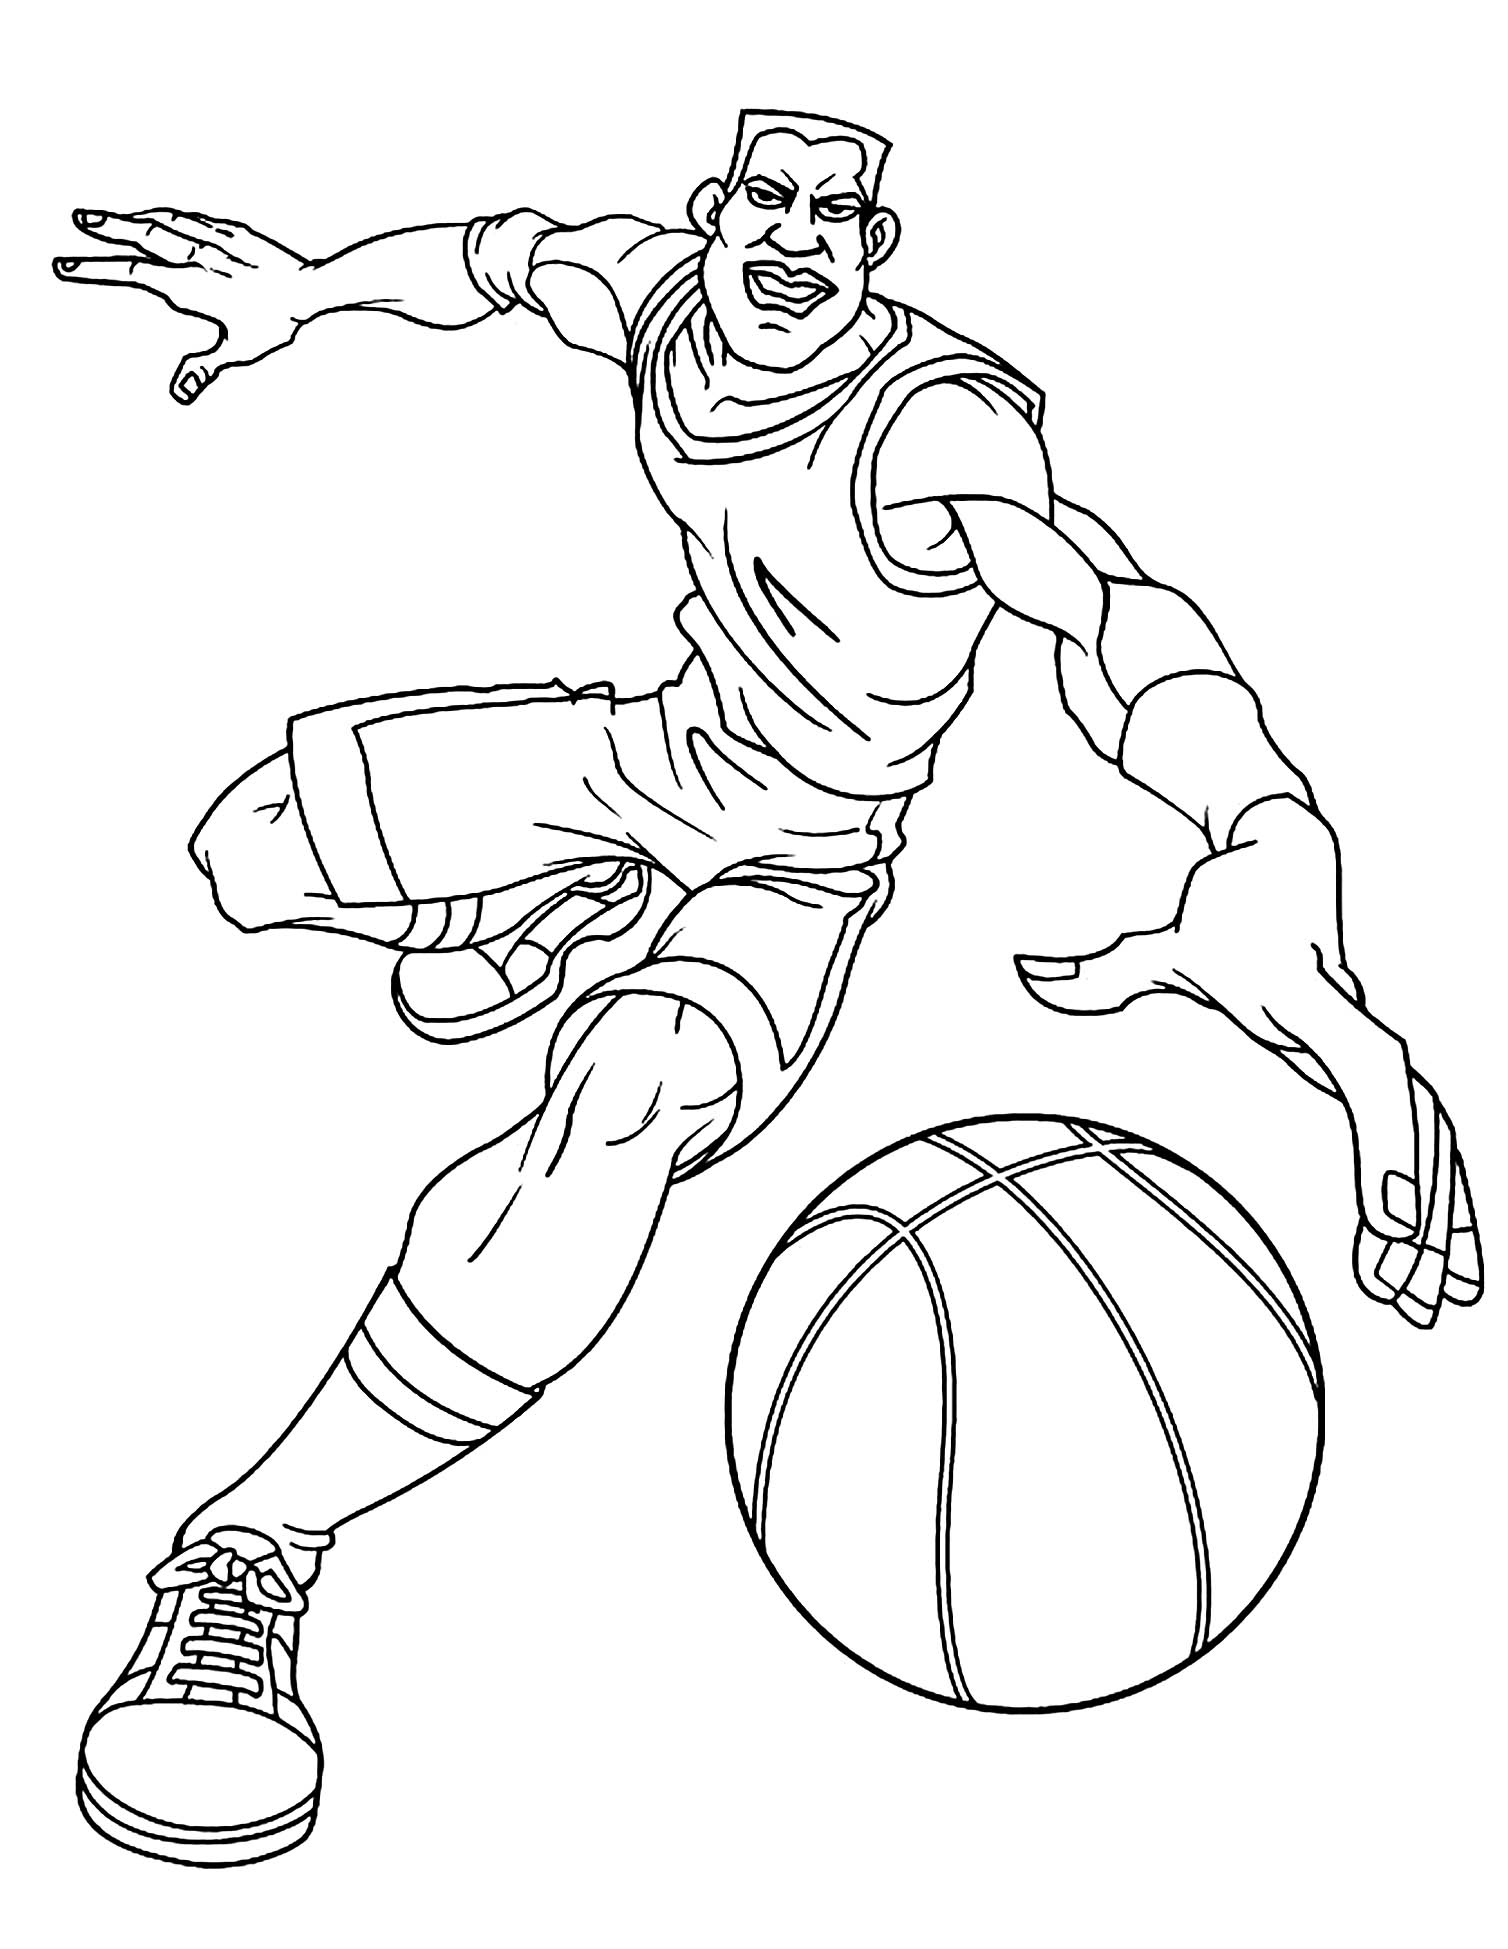 girls-playing-basketball-coloring-page-basketball-kids-coloring-pages